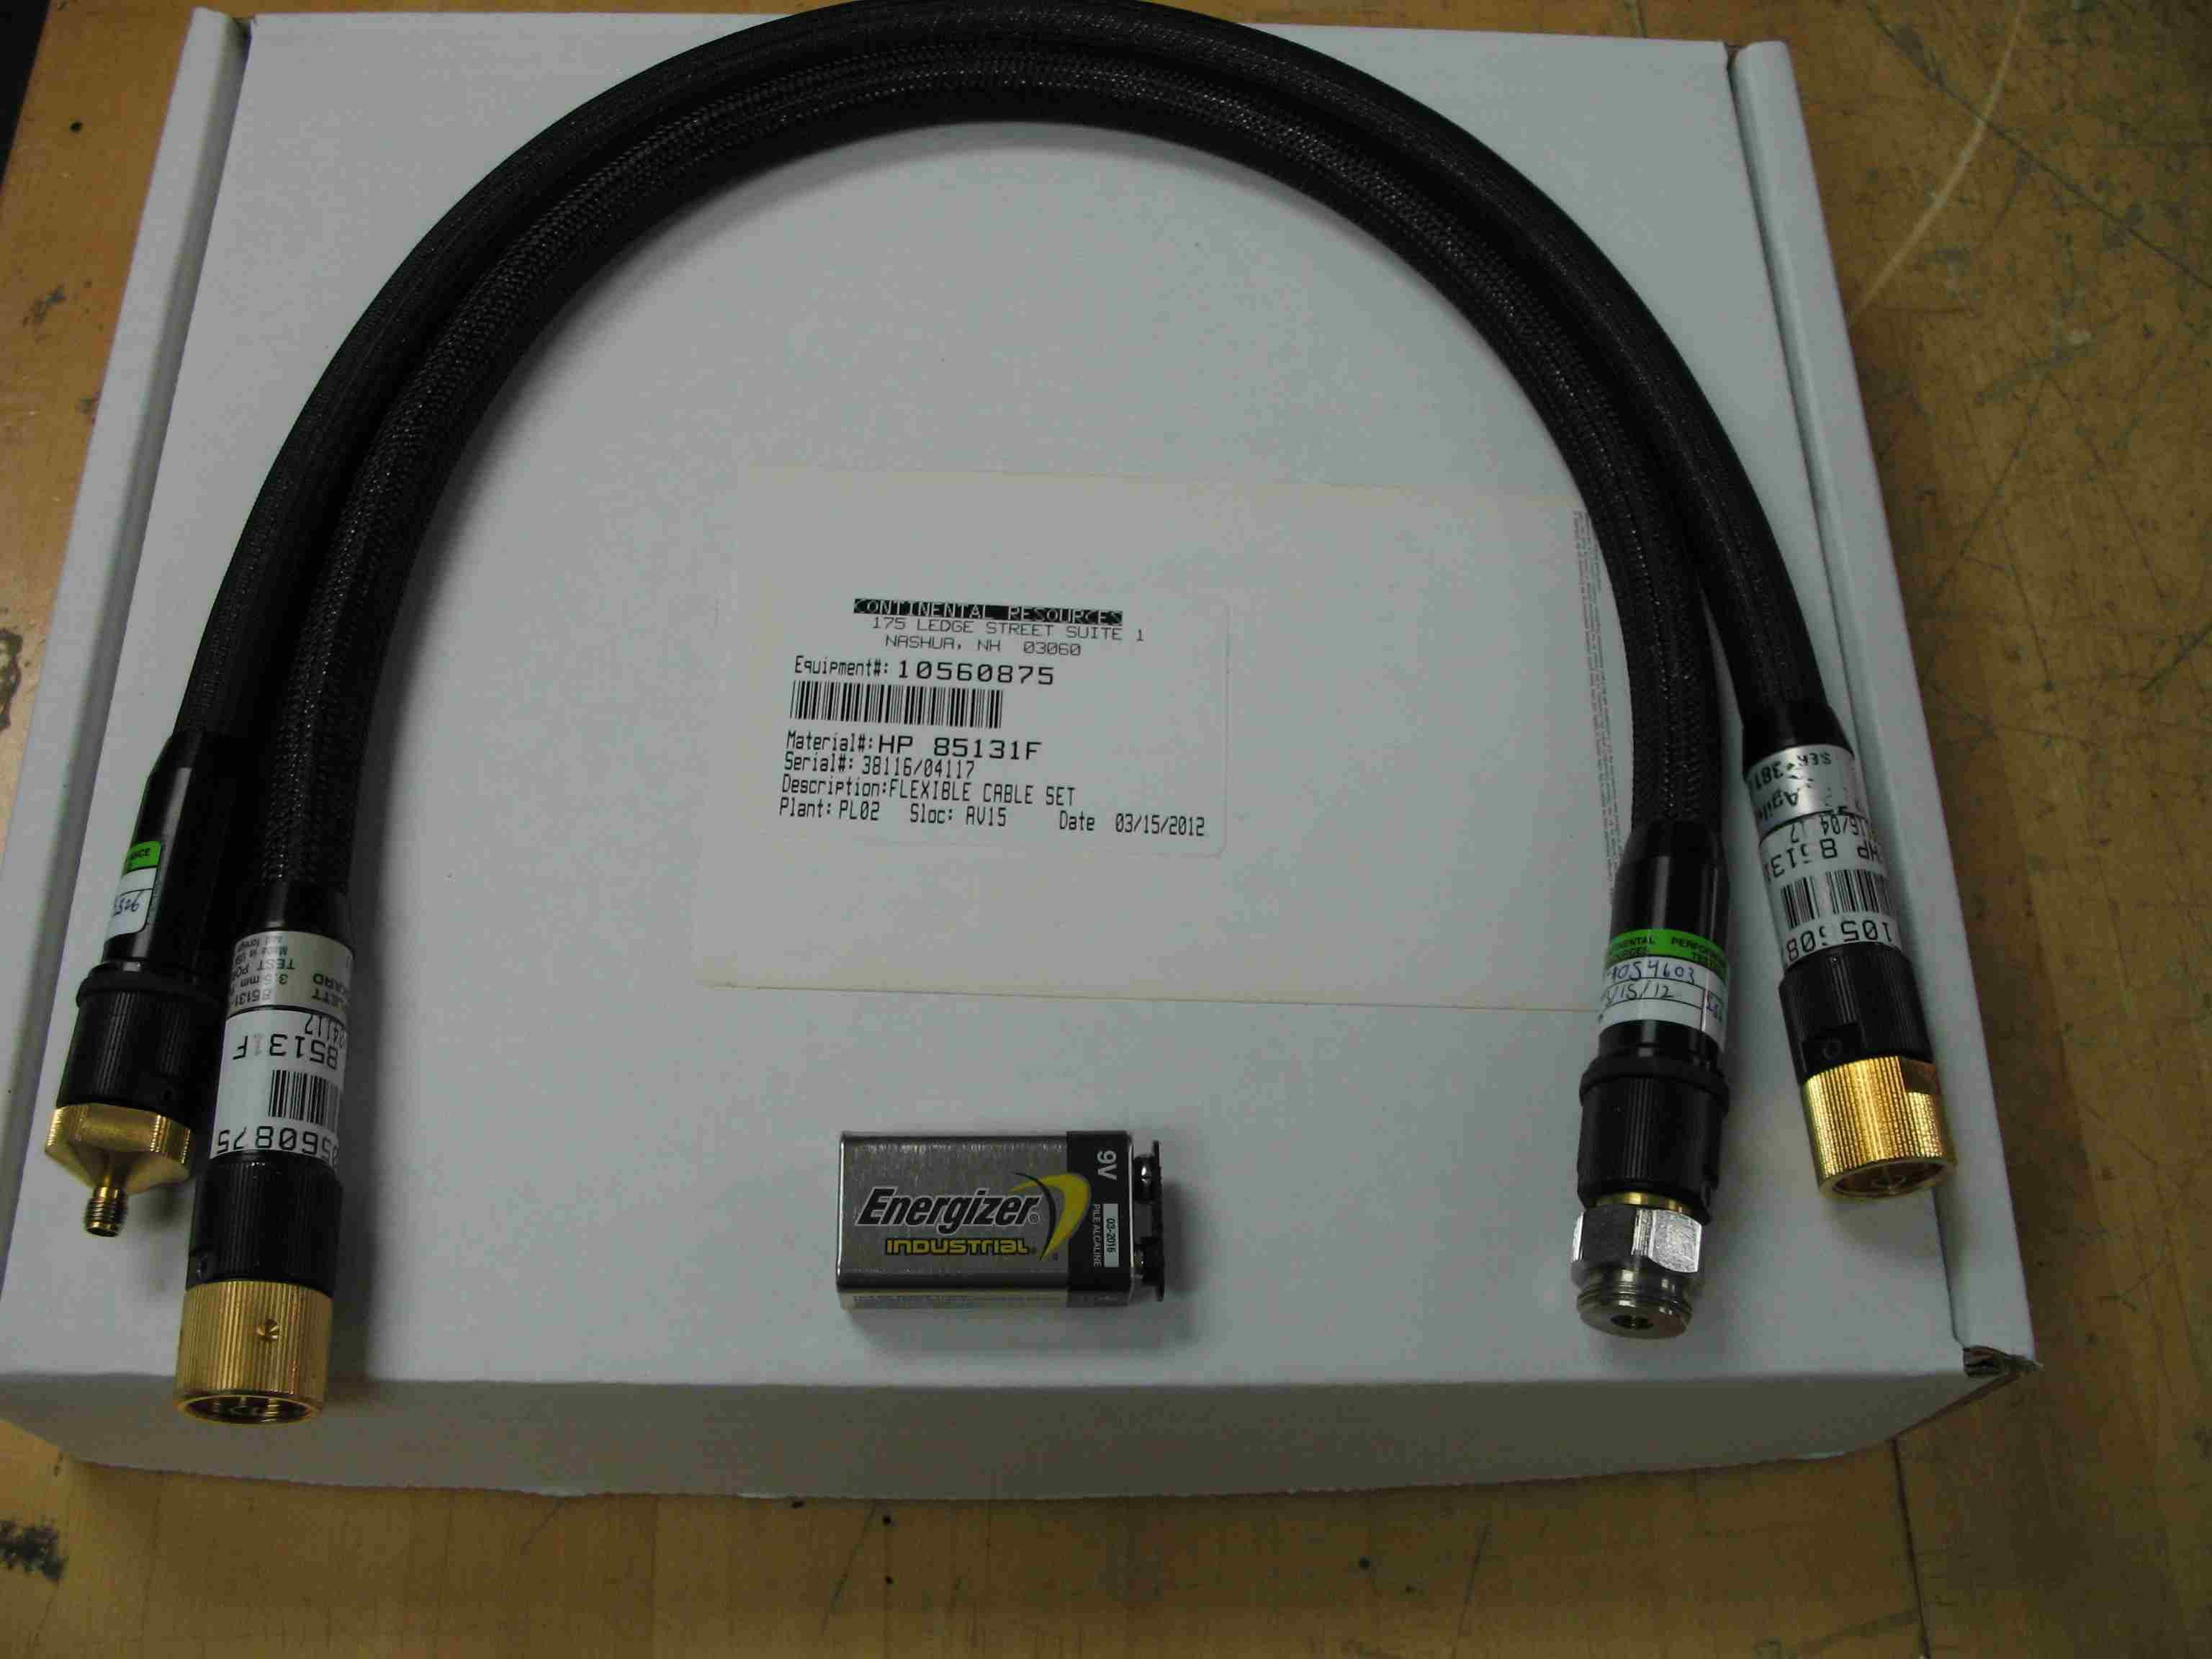 ends of test port cables with PP3 battery